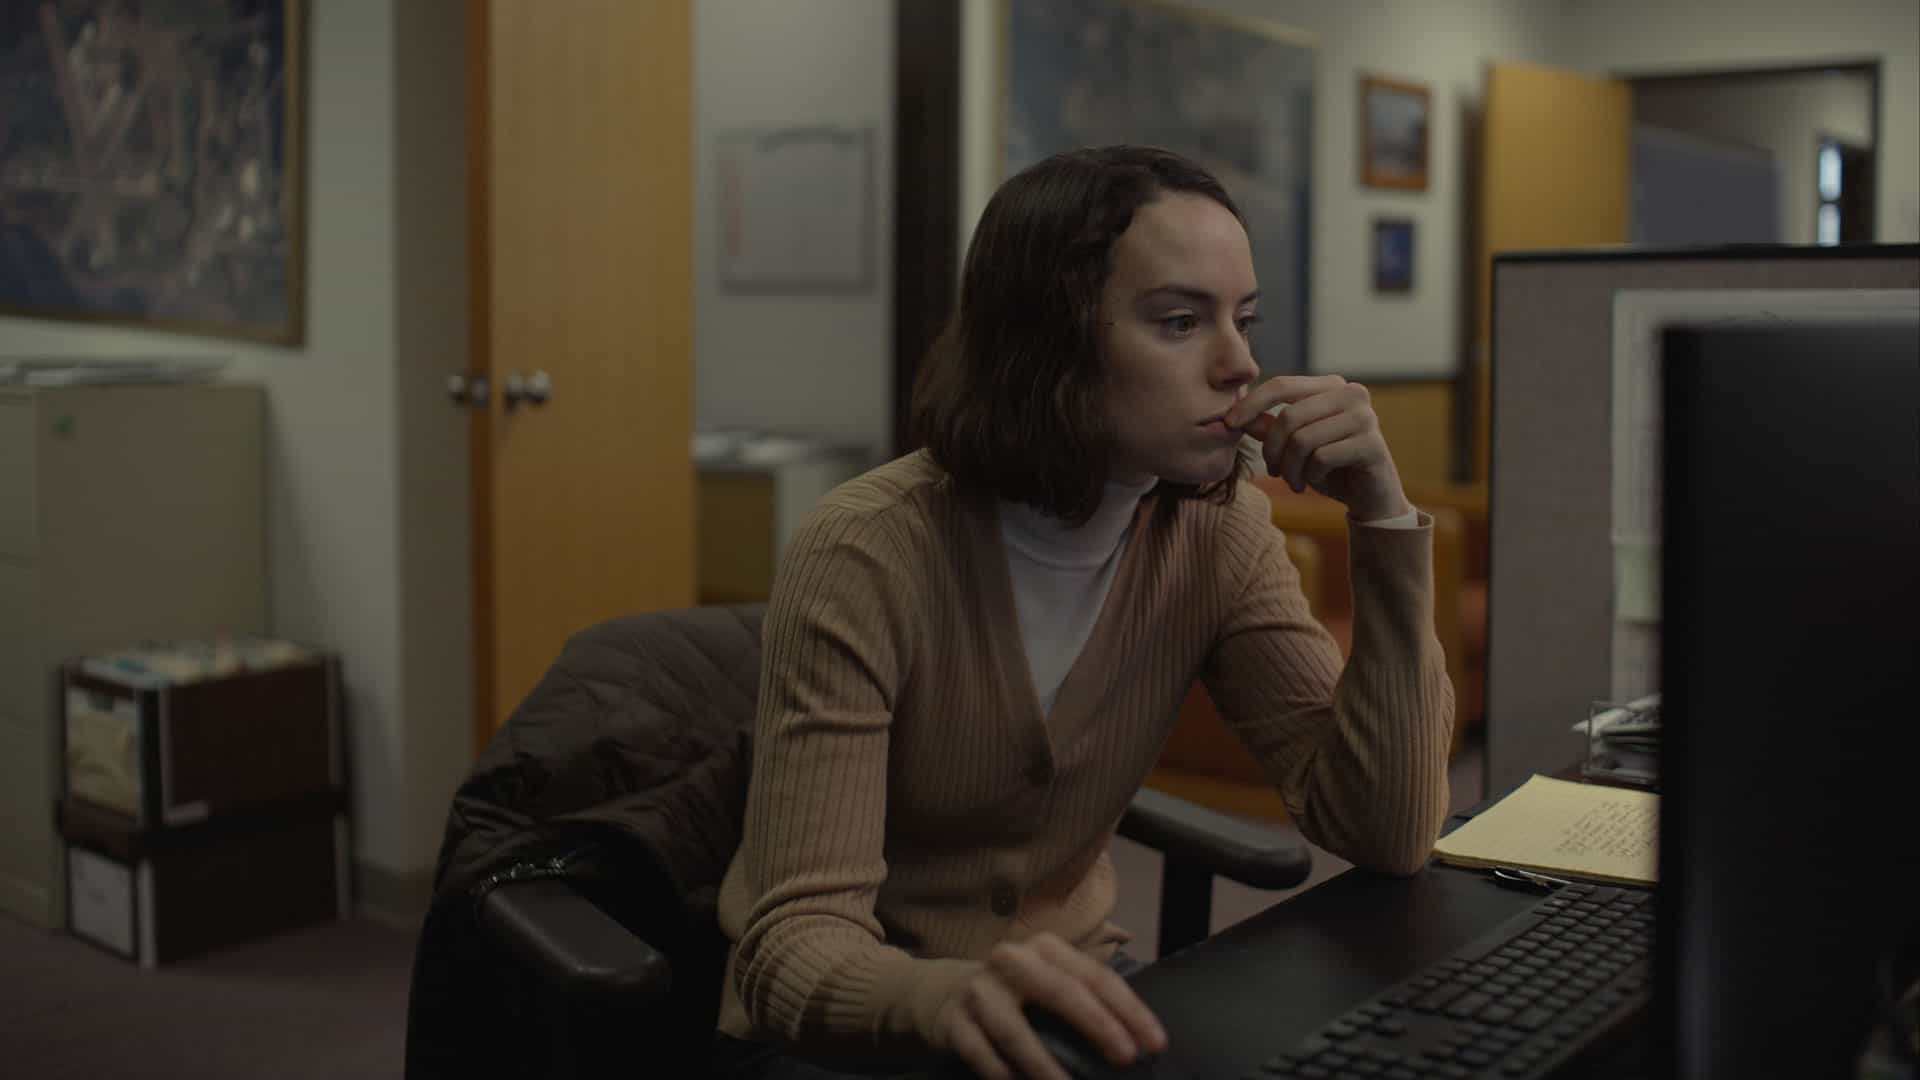 Fran (Daisy Ridley) at her computer